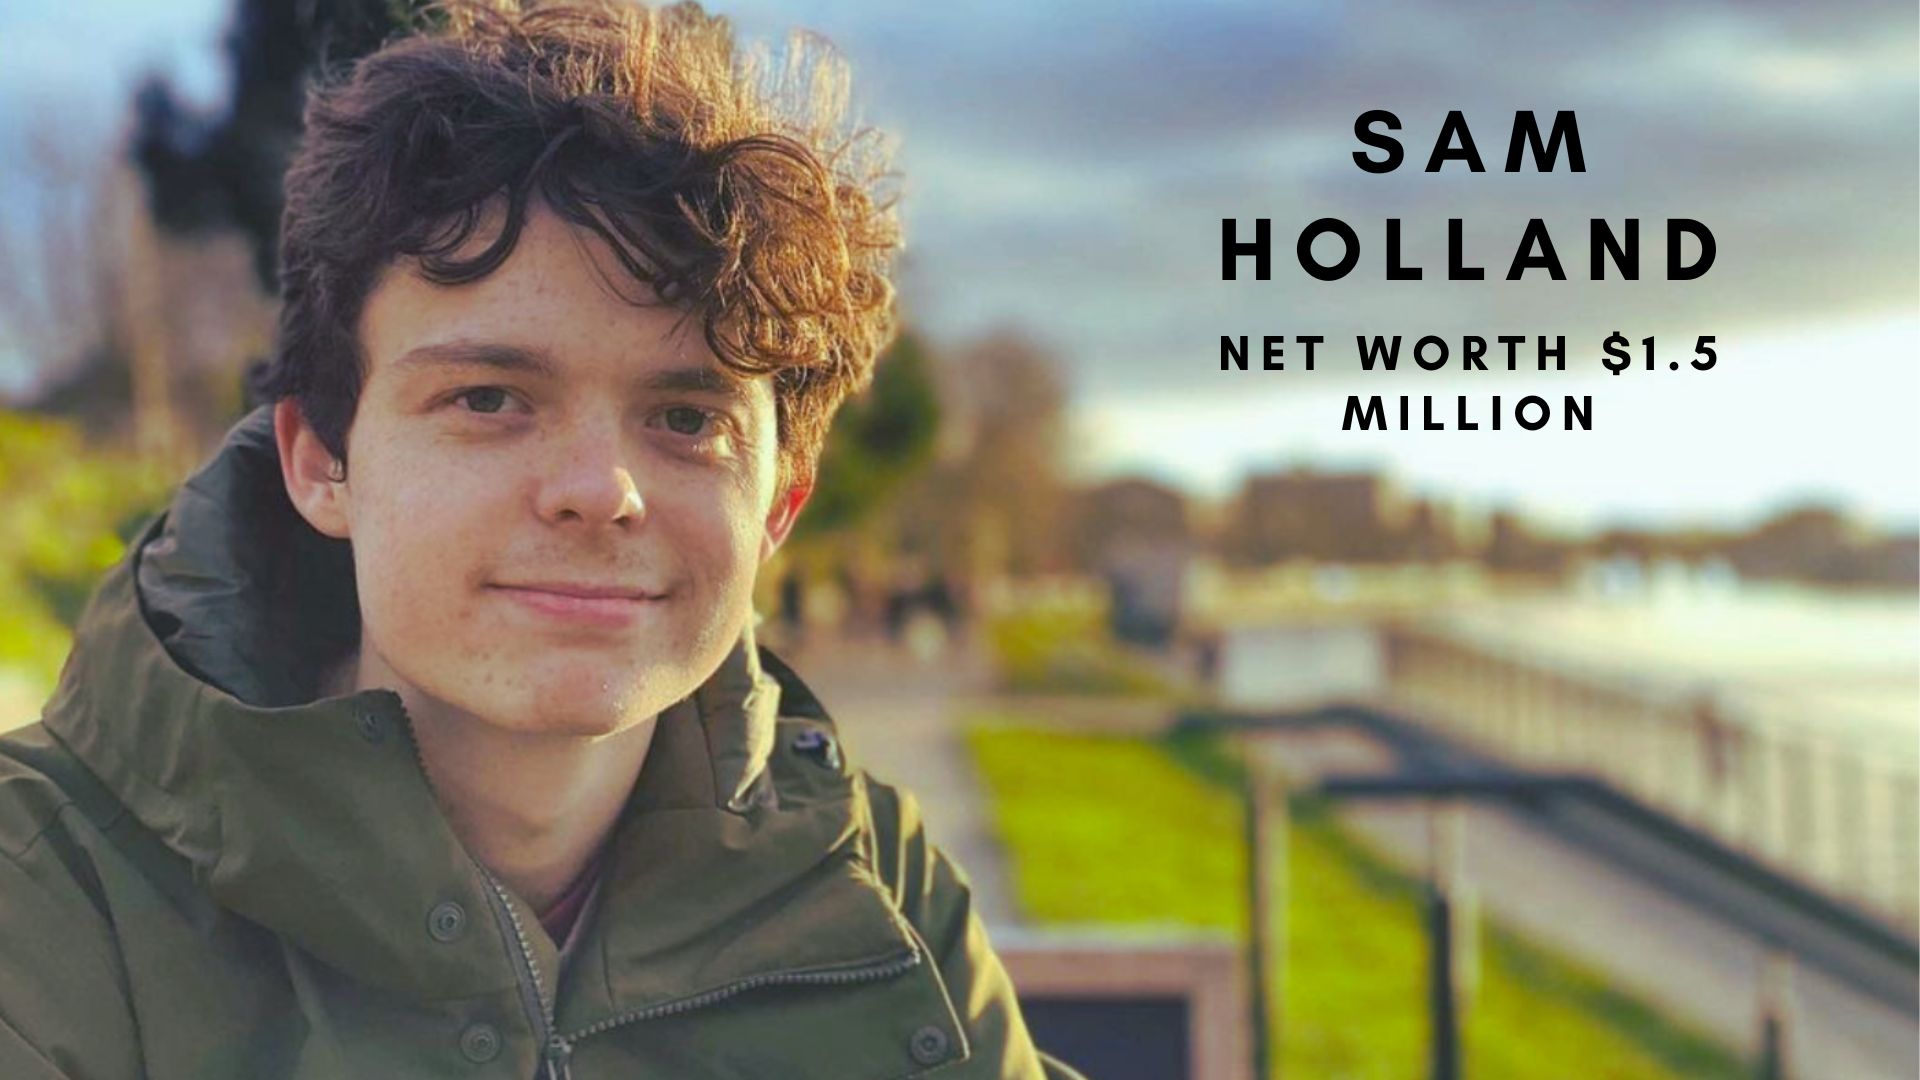 Sam has a strong social media following with over 300,000 followers on Instagram. (Credits: @samholland1999 Instagram)